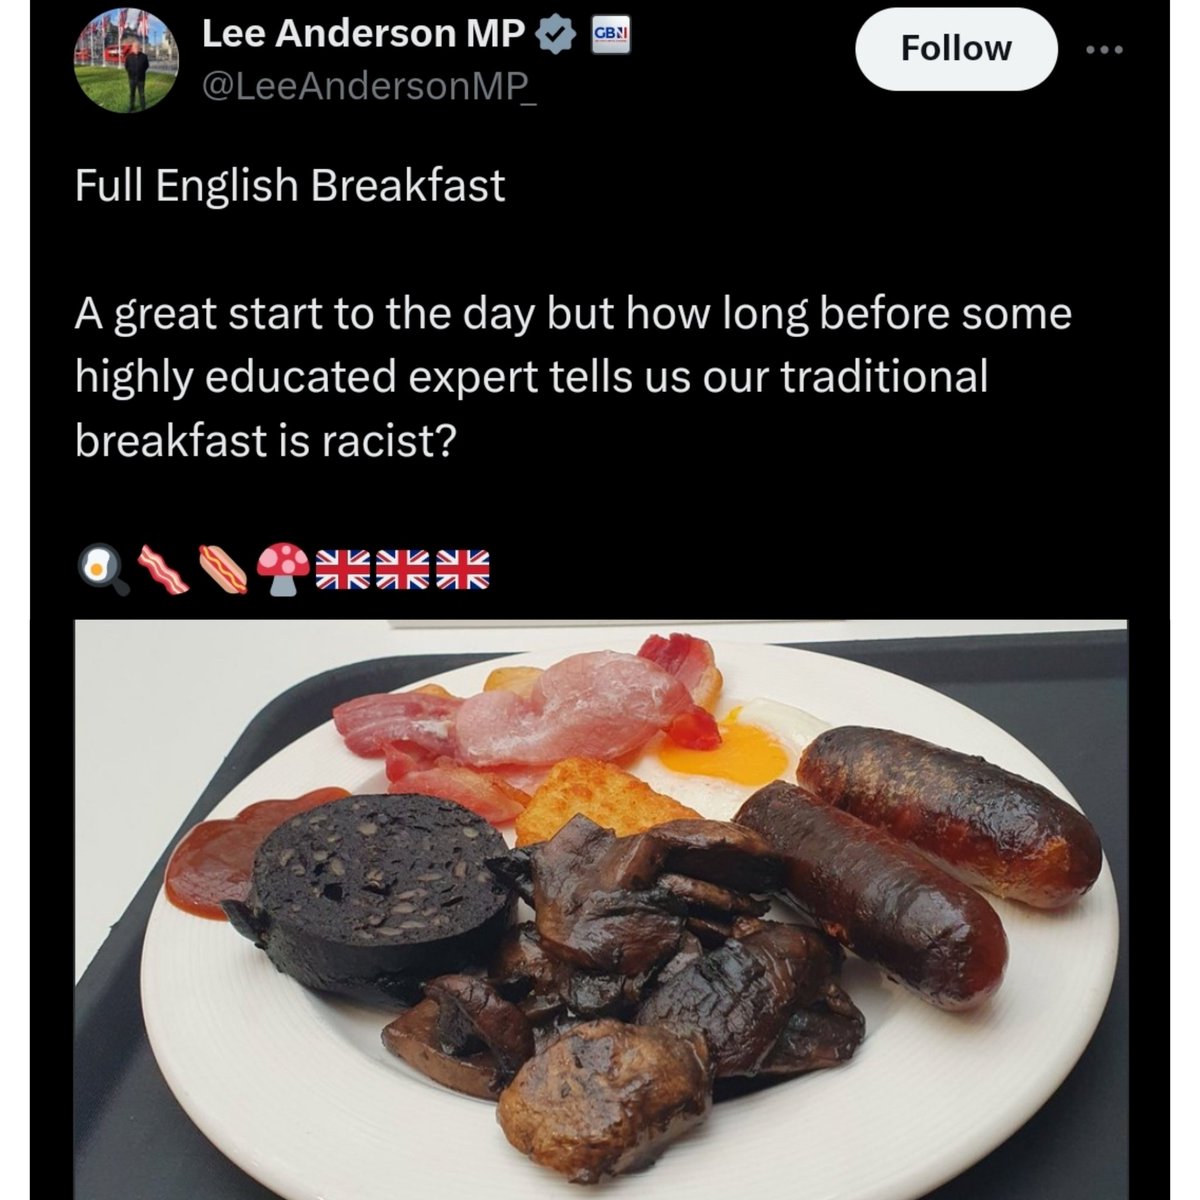 It’s not racist at all, but it’s badly cooked shit on a plate mate!😘